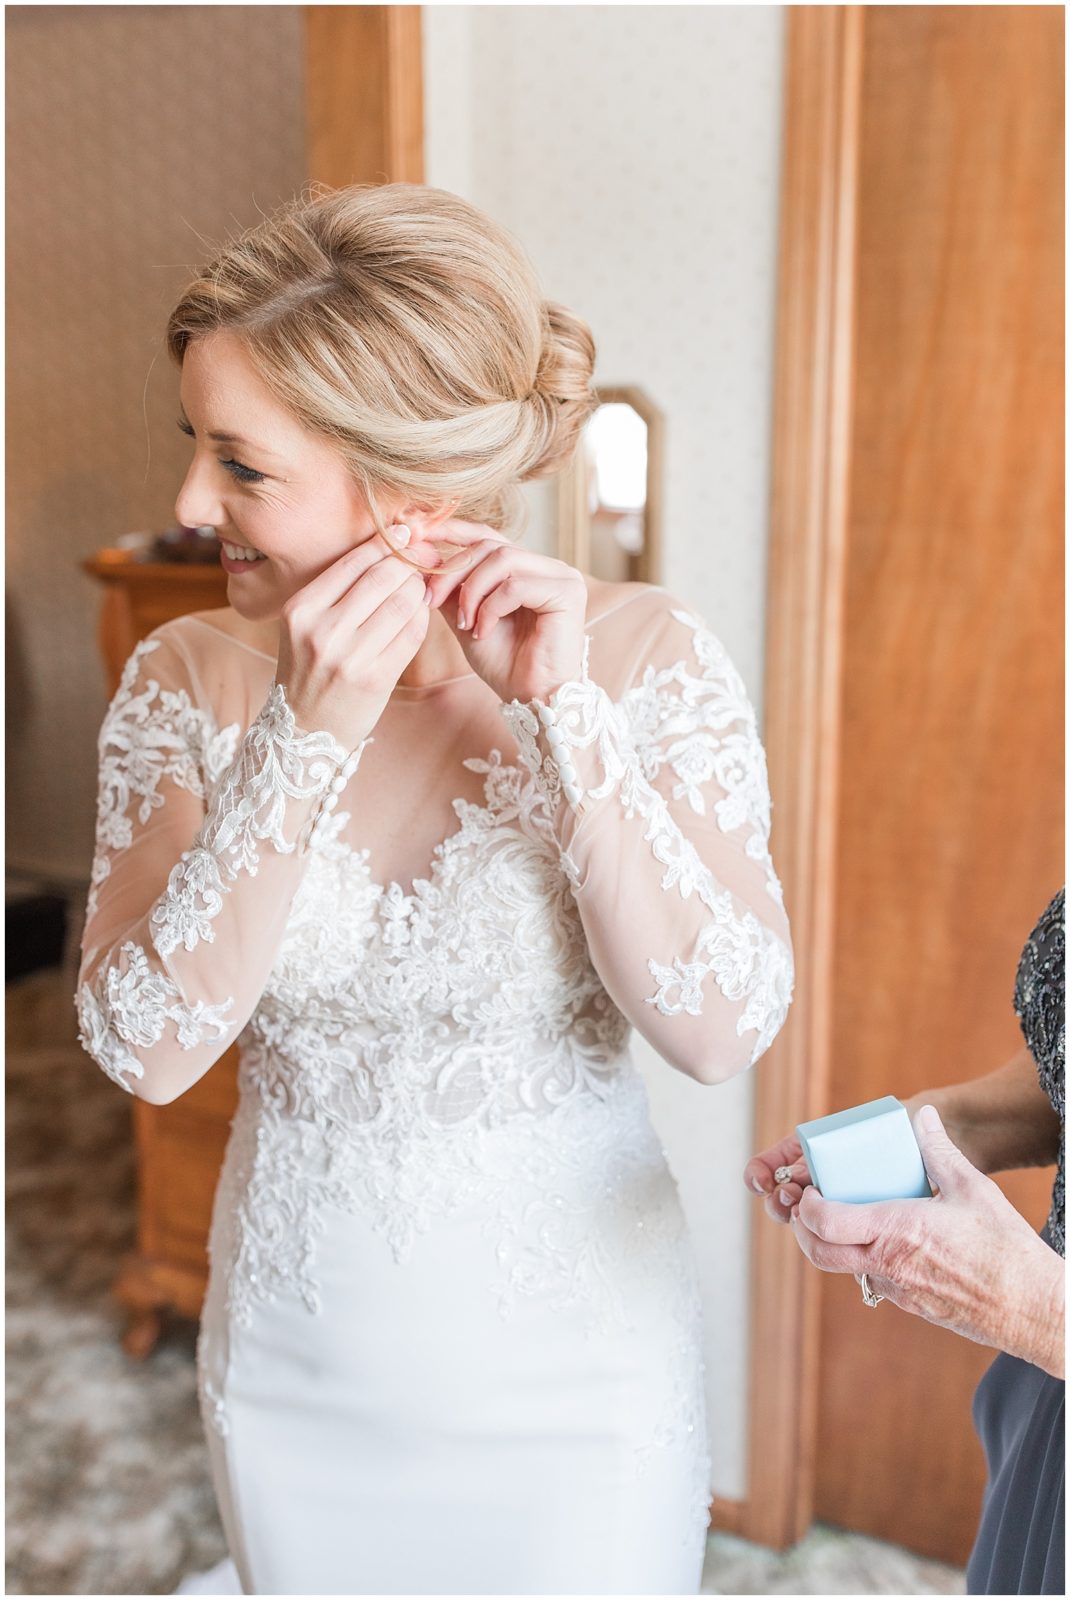 Bride Getting Ready, shot by Jessica Brees, photographer and videographer near Sioux City, Iowa